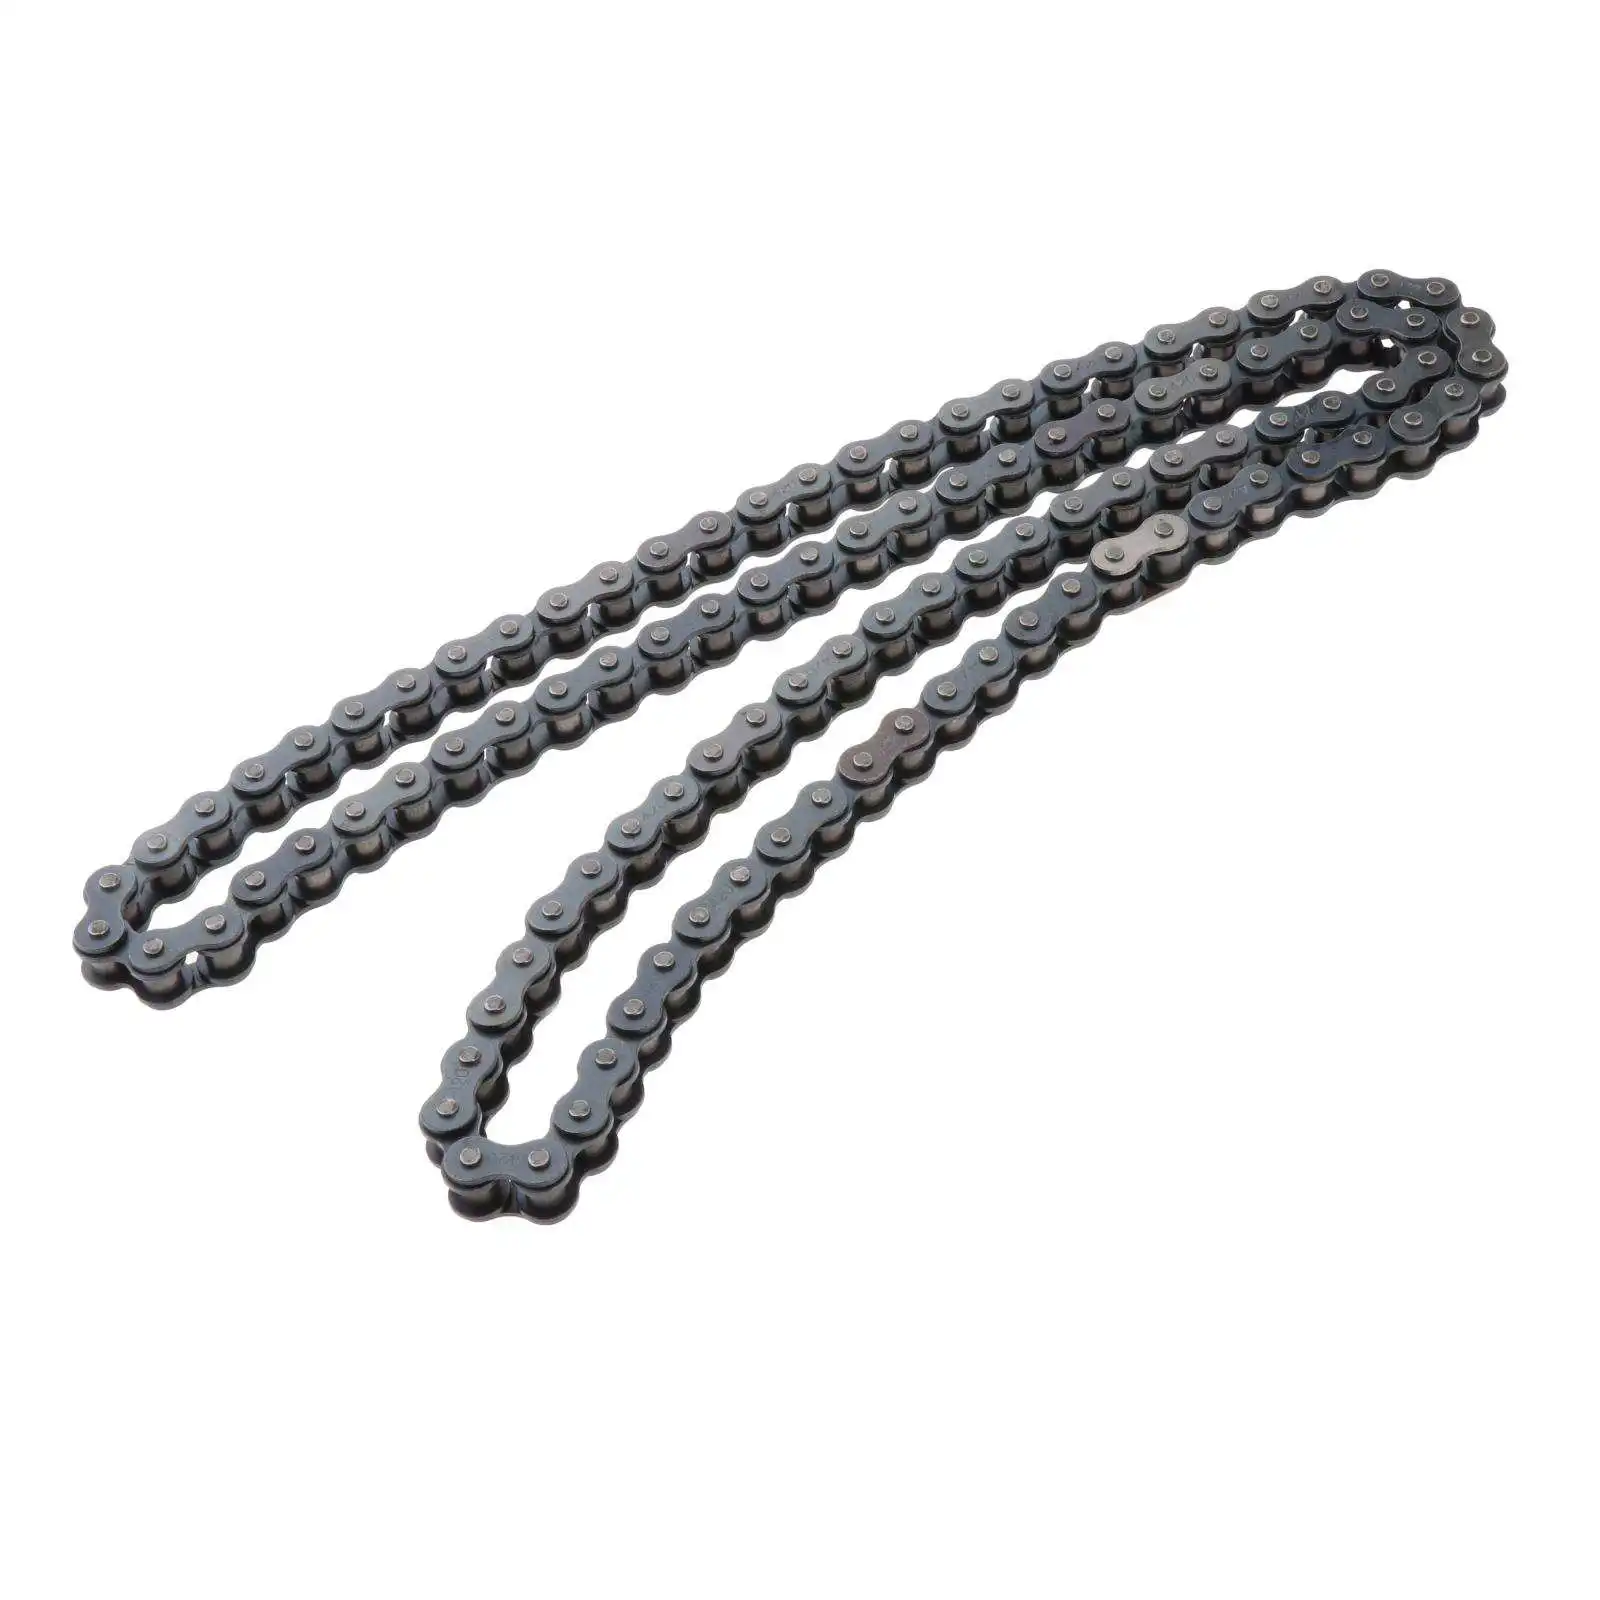 420 Motorcycle Chain 50-110Cc Tools Drive Chain 96 Link 102 Link 104 Link 106 Link Motorcycle Chain for Motorcycle Bike